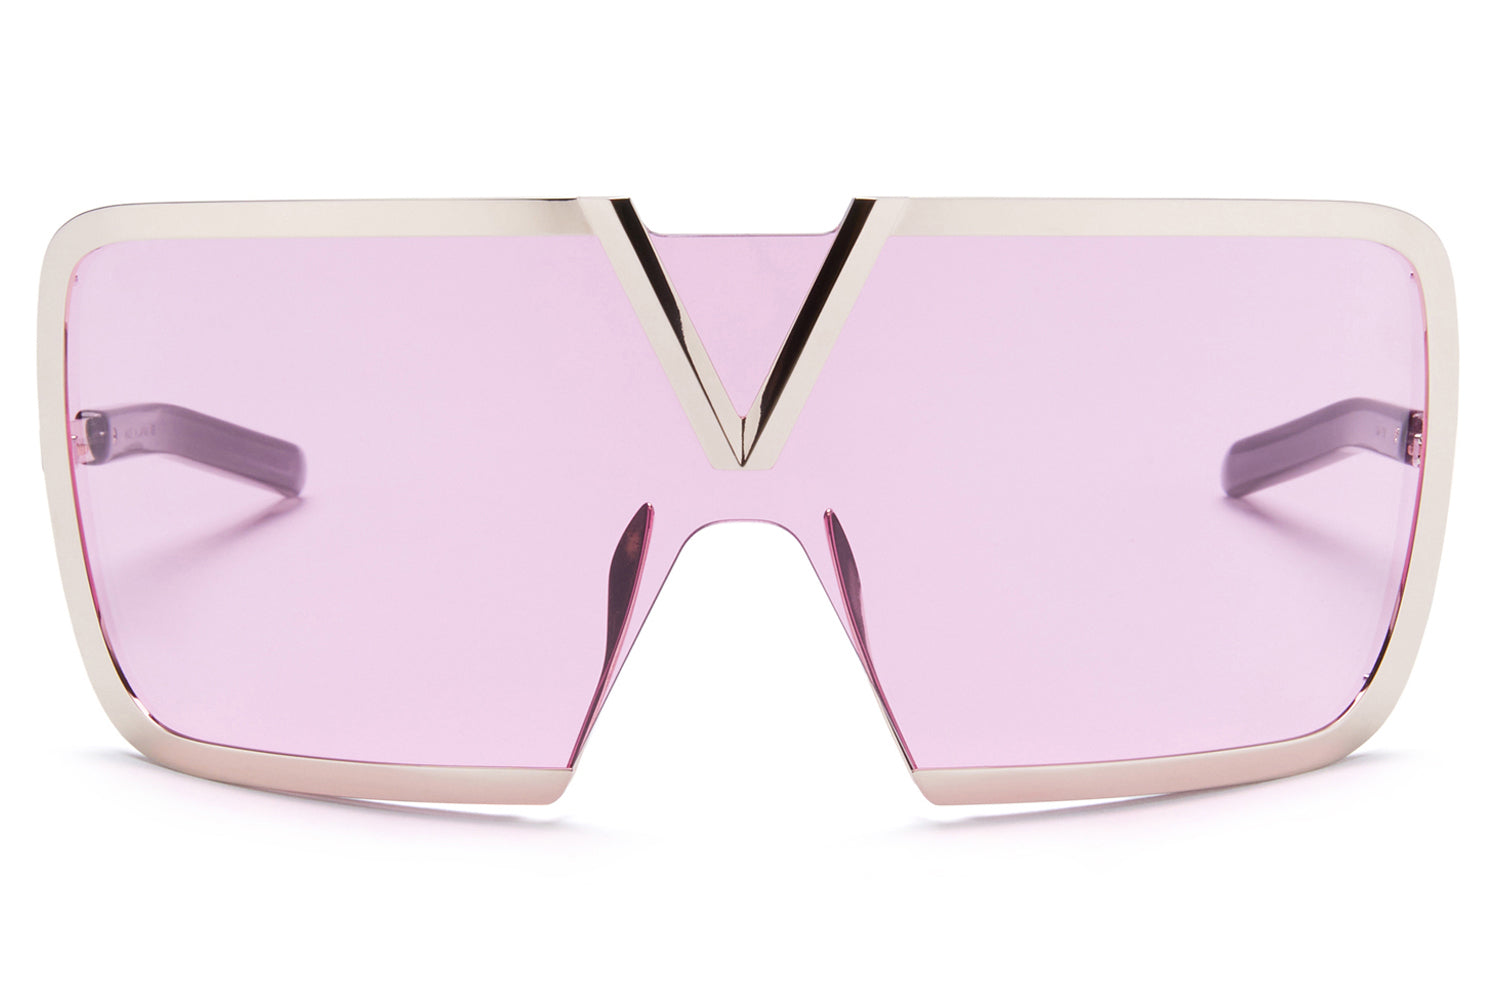 Valentino Eyewear - V-Romask Sunglasses | Specs Collective, White Gold & Crystal Black with VA Pink Lenses